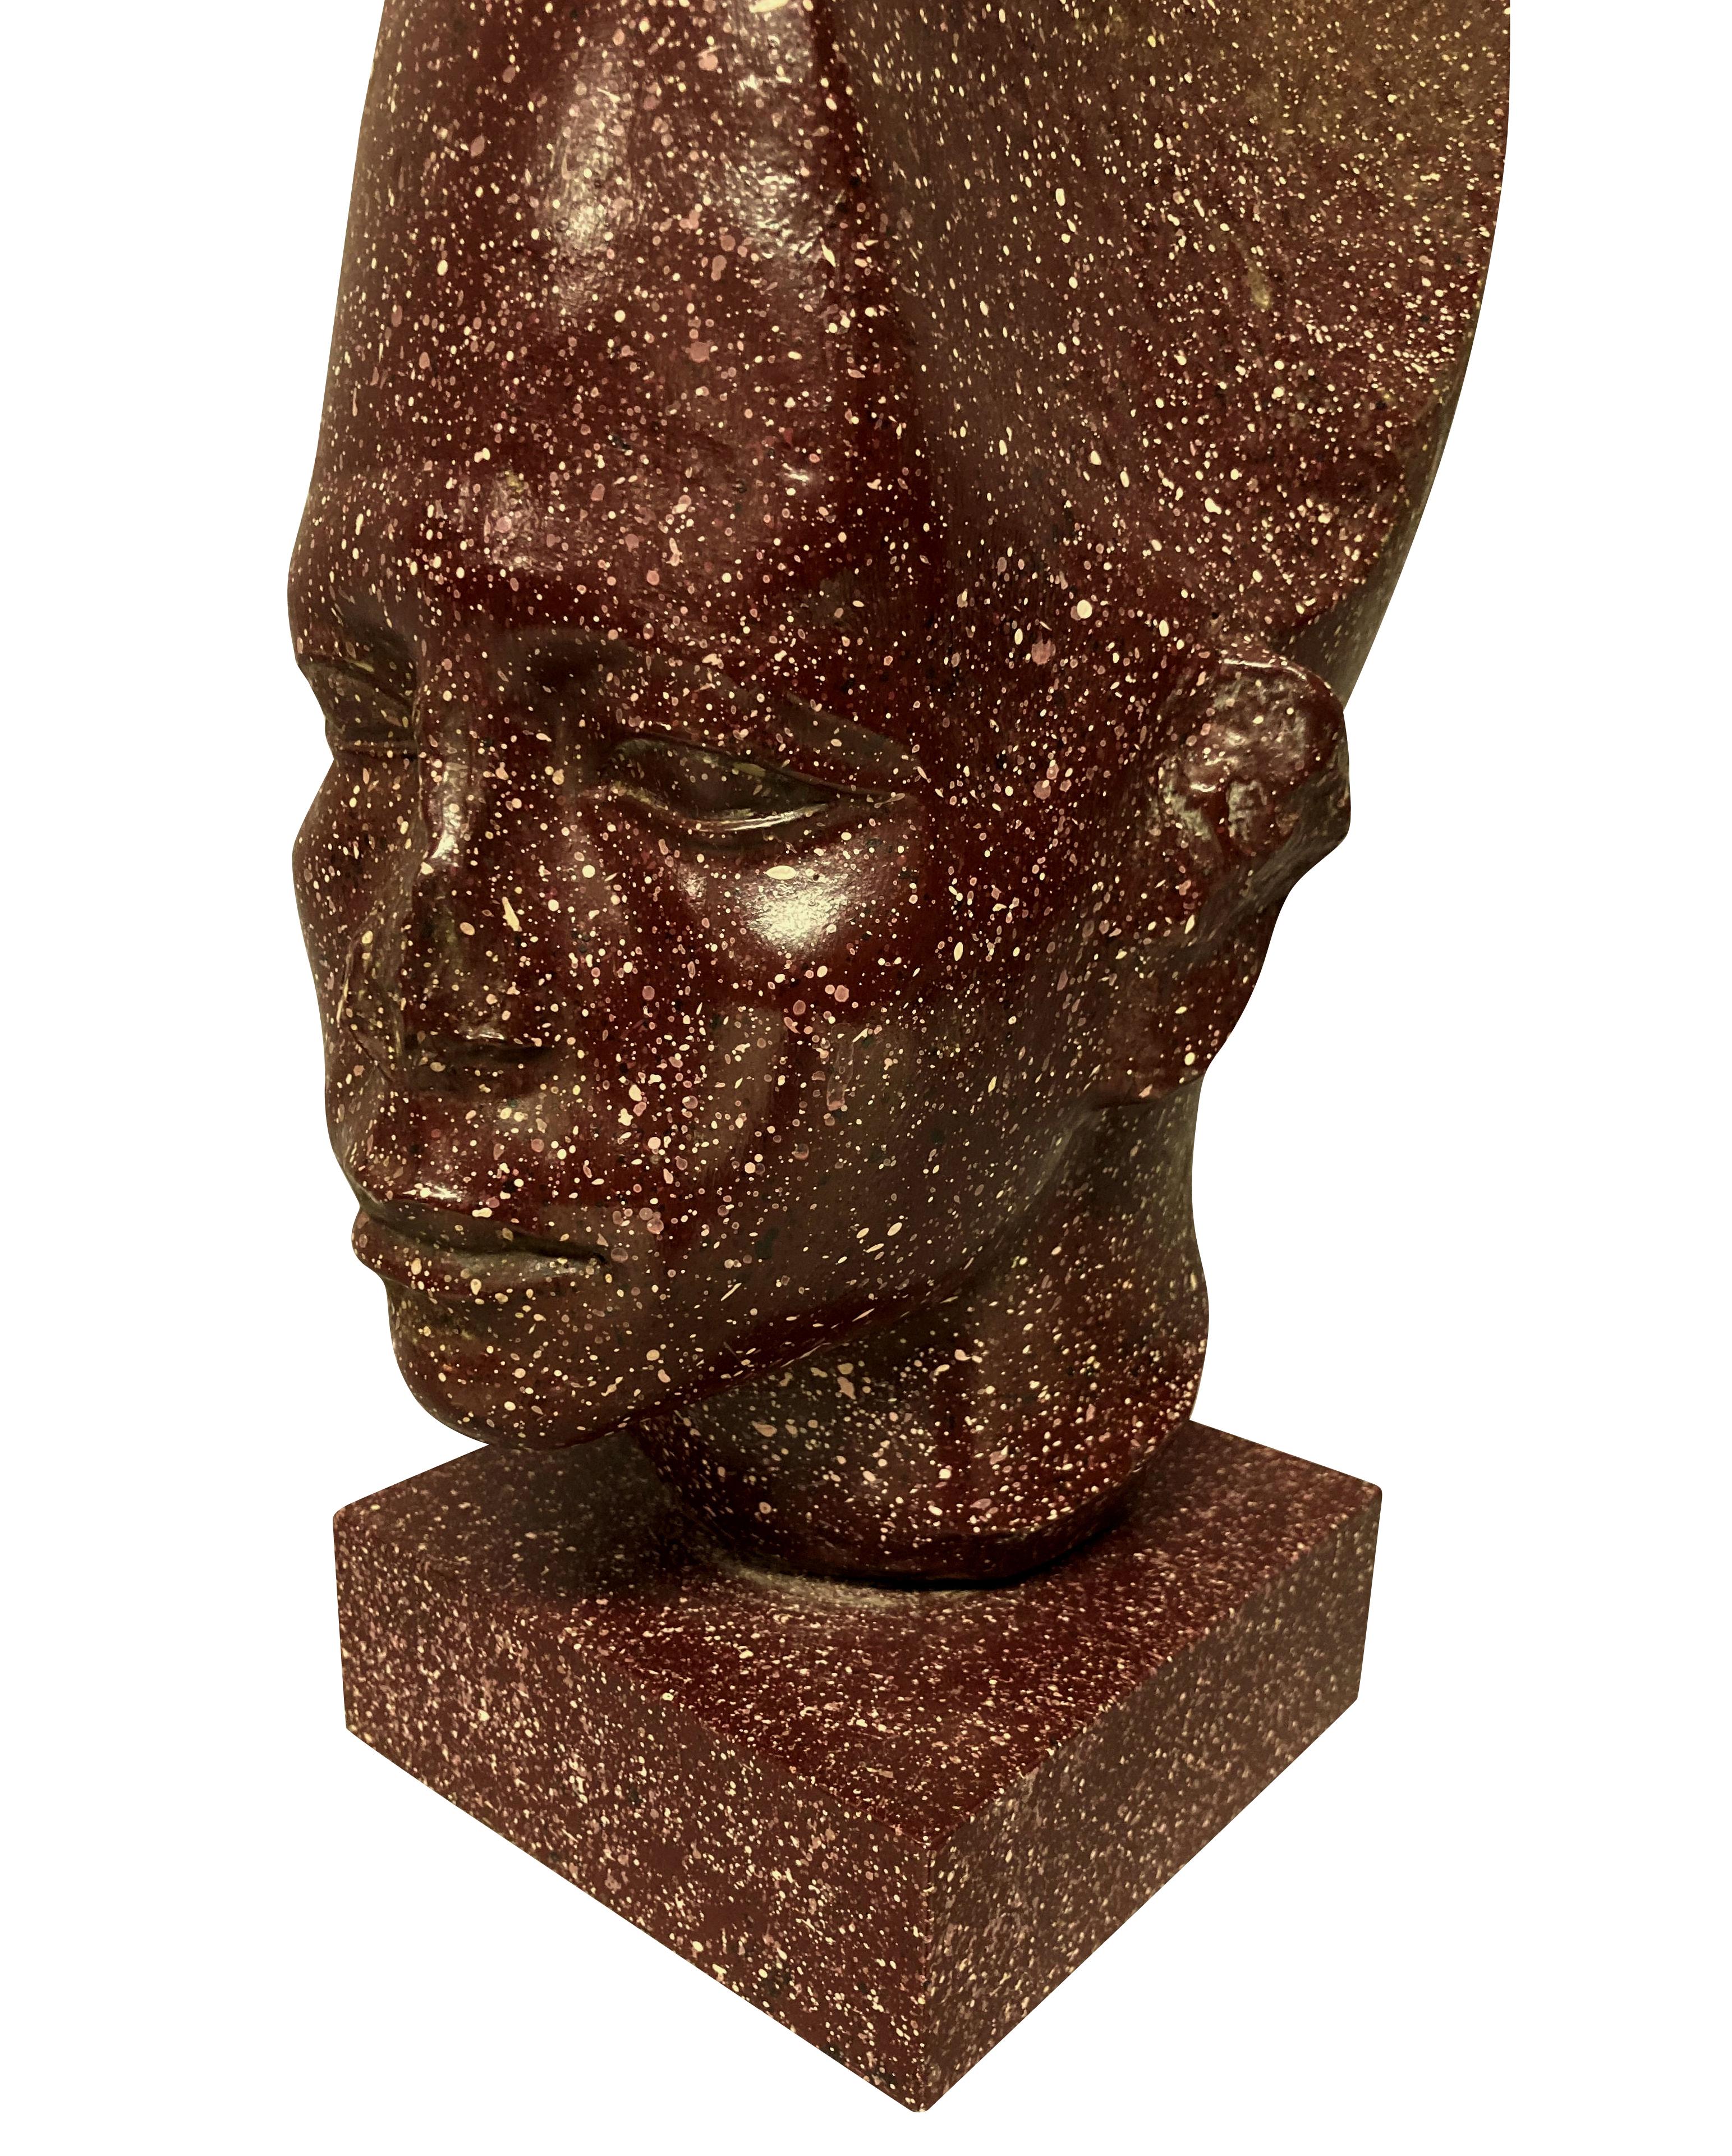 Late 20th Century Faux Porphyry Egyptian Head after the Antique